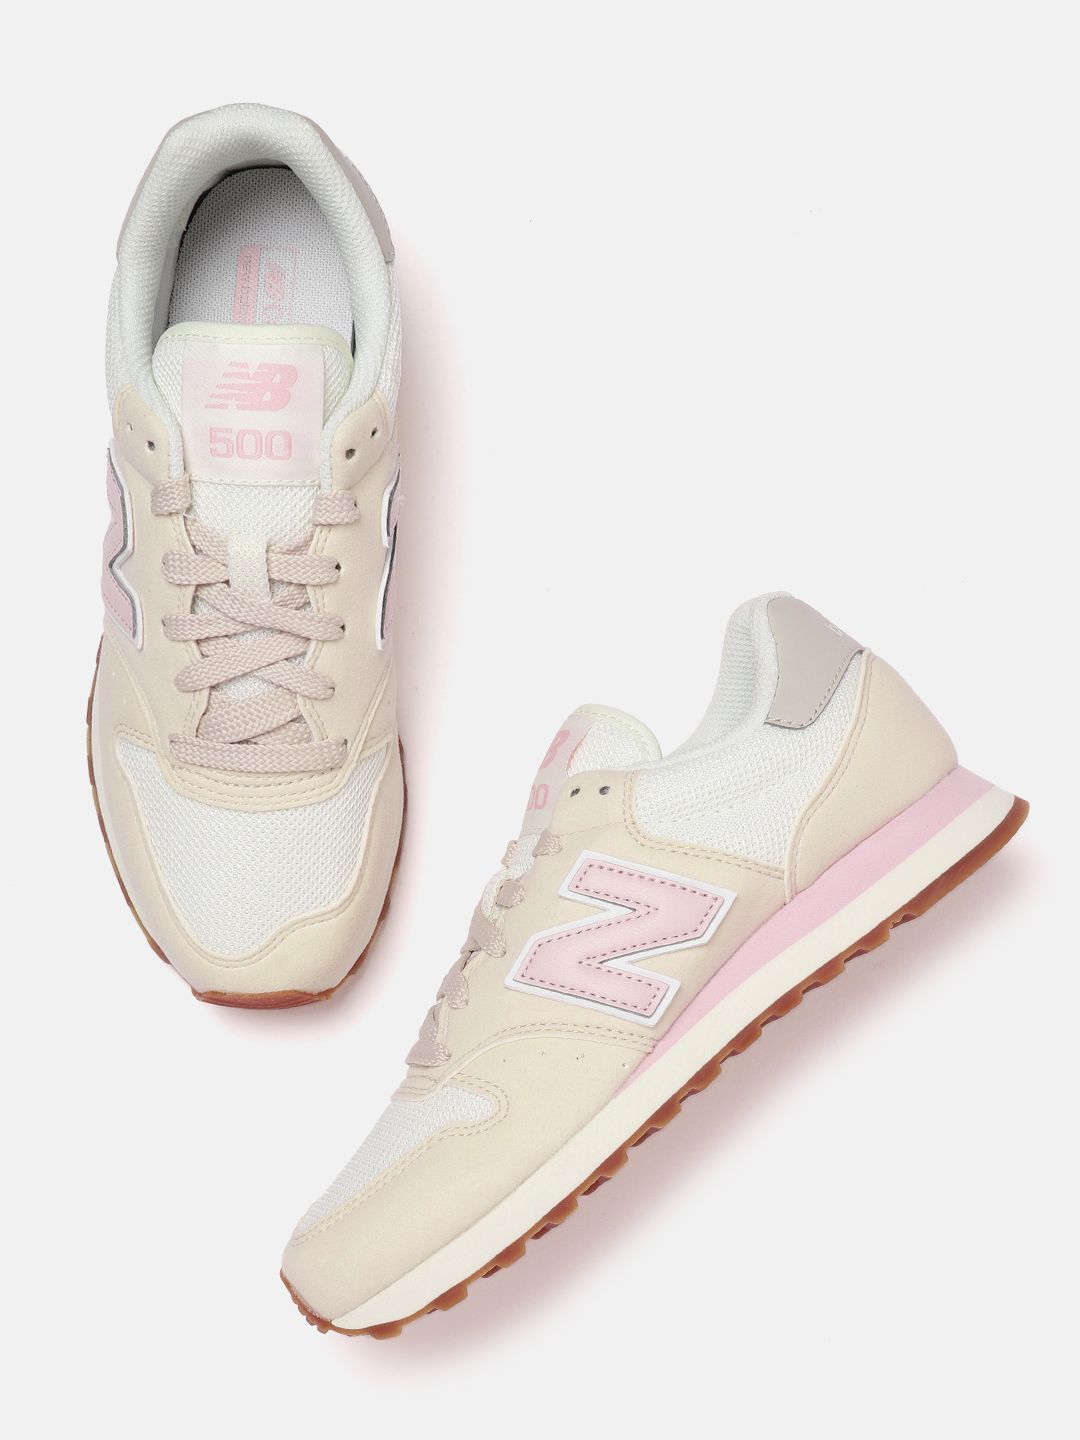 New Balance Women Cream-Coloured & Pink Woven Design Colourblocked Suede Sneakers Price in India